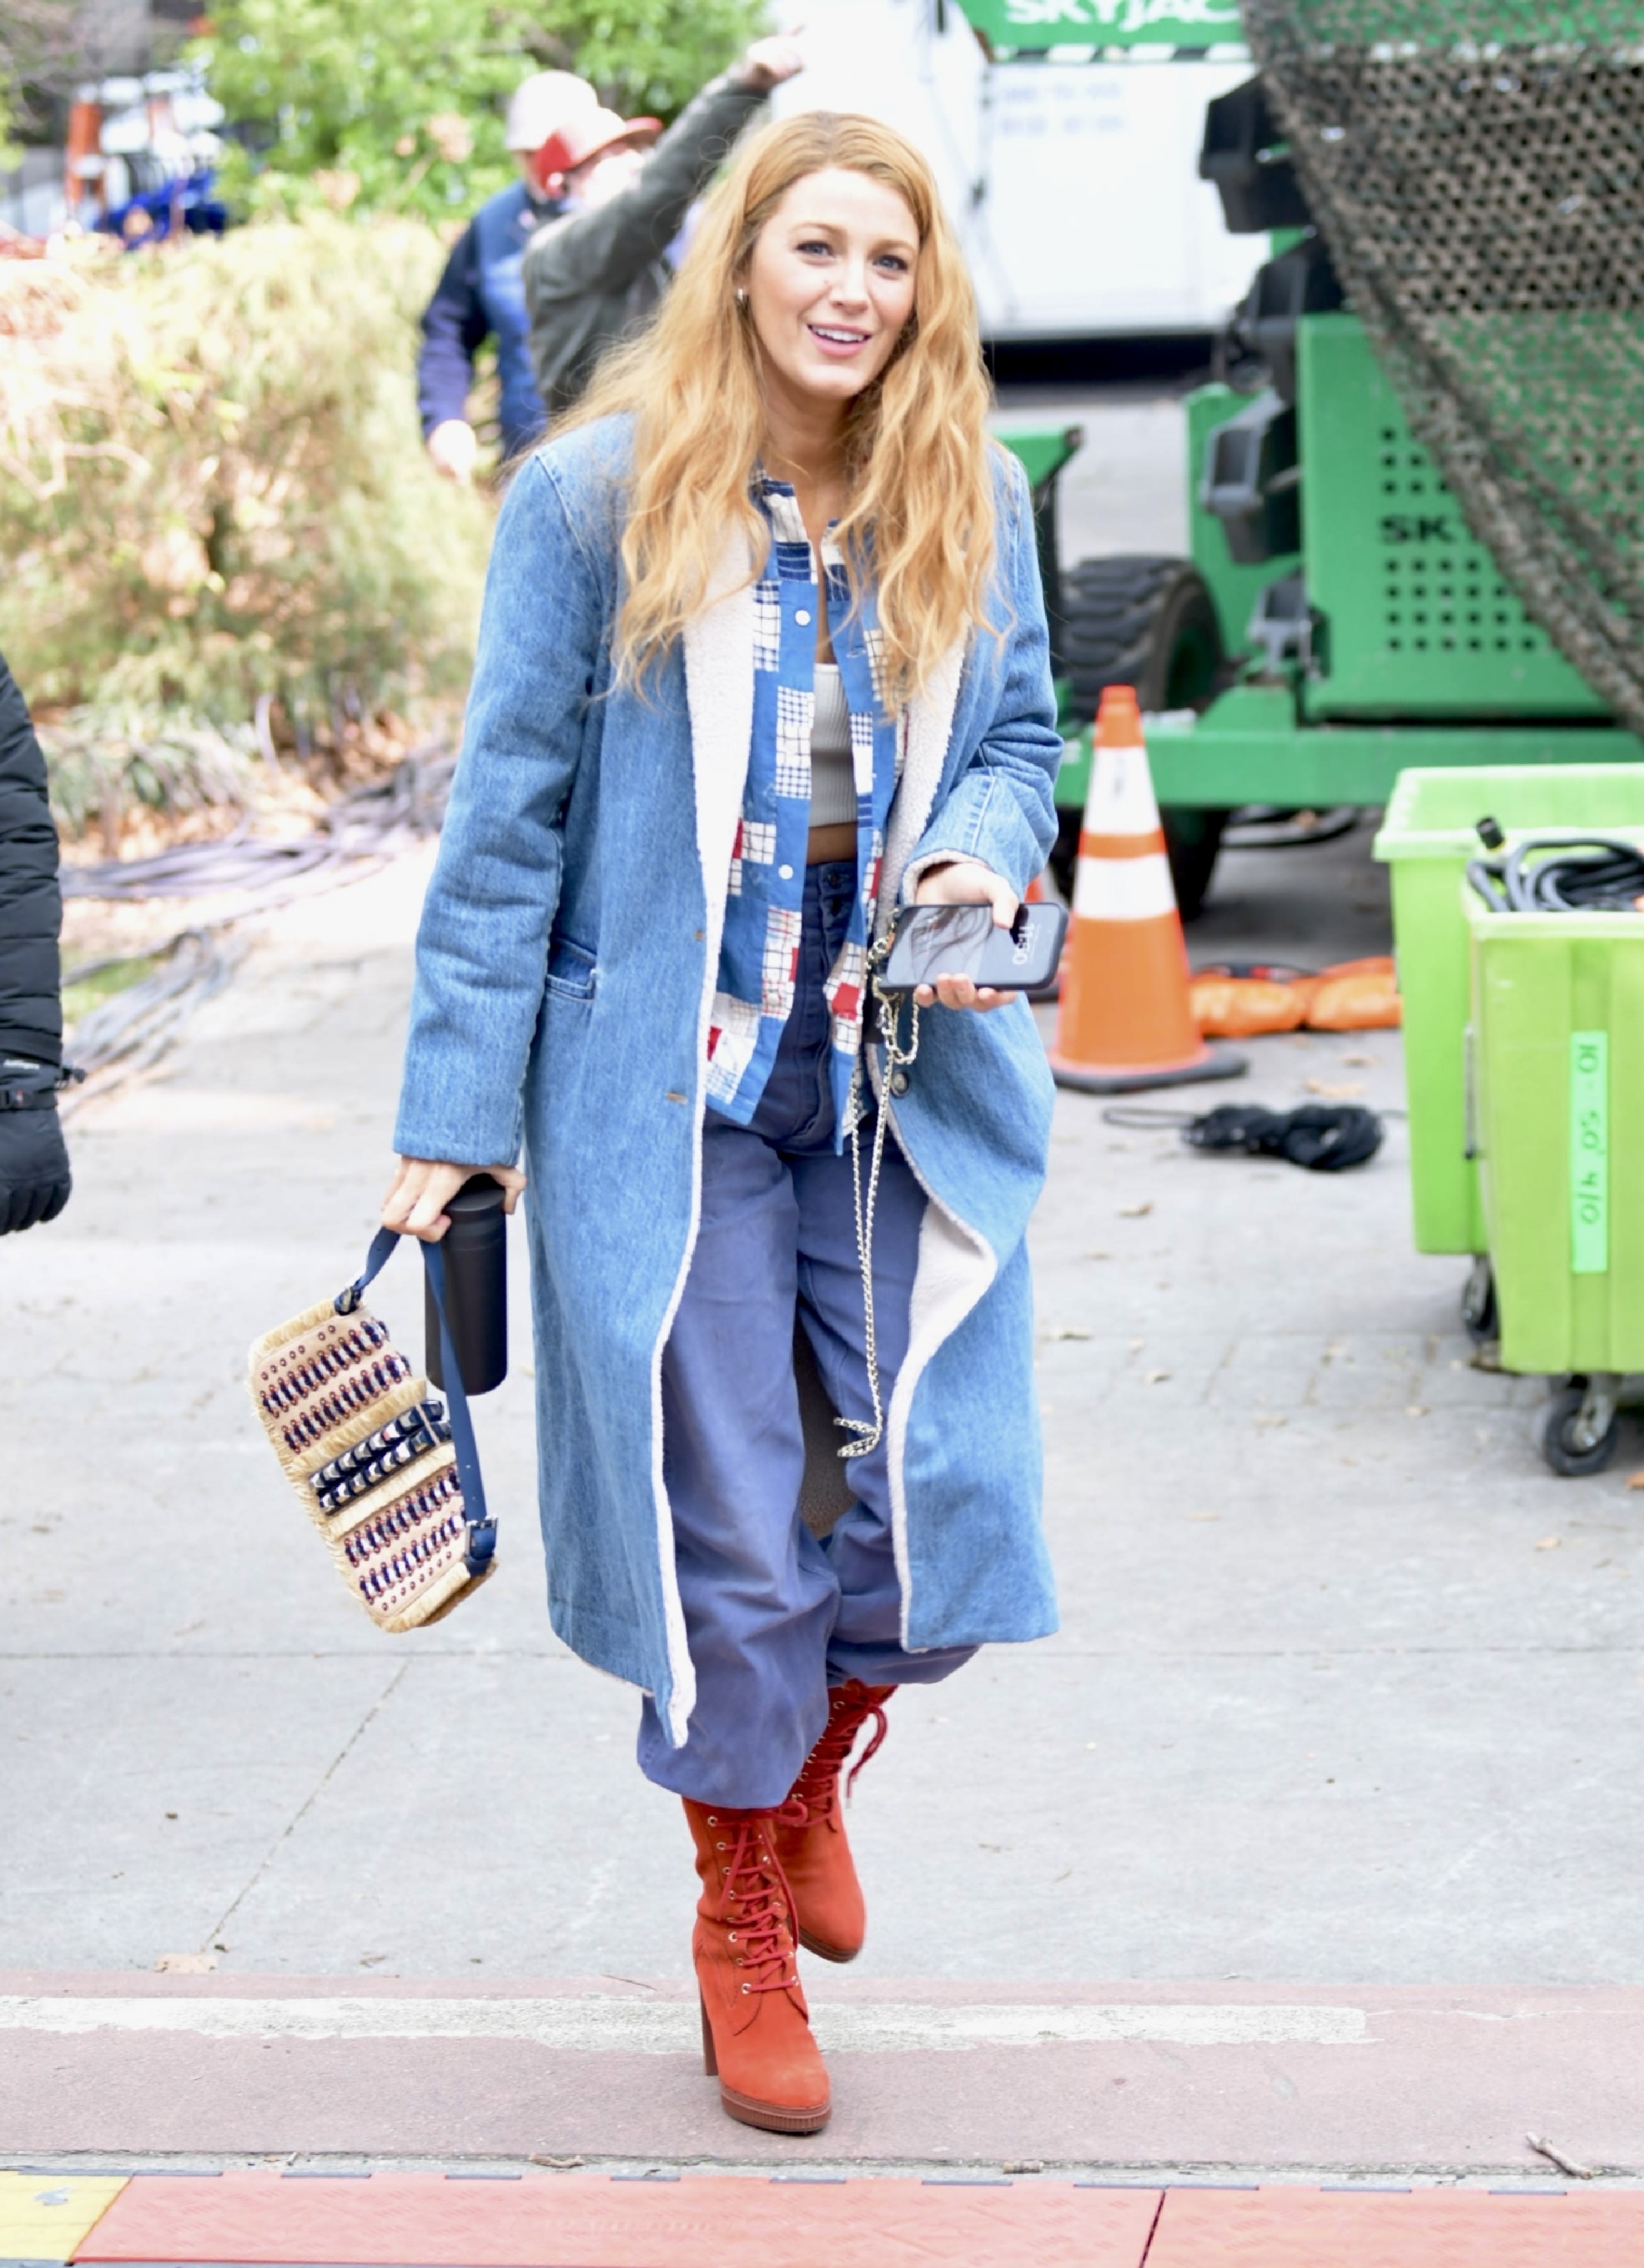 Blake Lively wearing a long coat, patterned scarf, and red boots on a city street